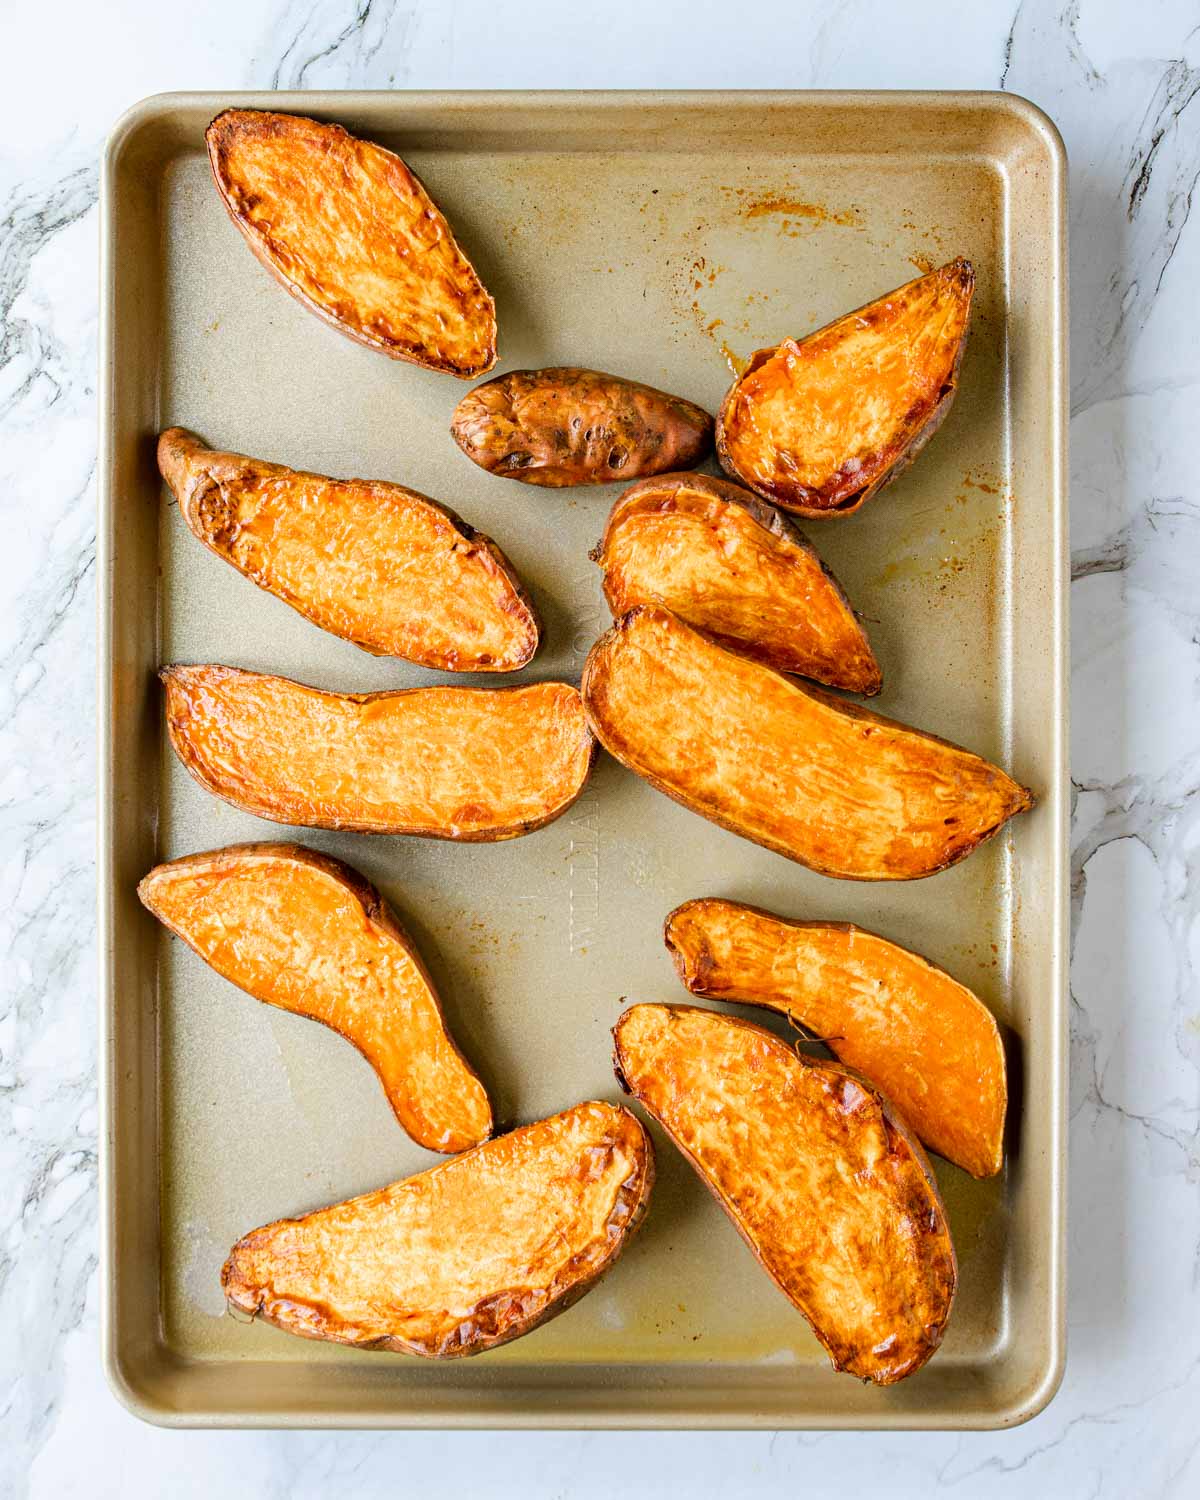 sweet Potatoes that have been roasted perfectly